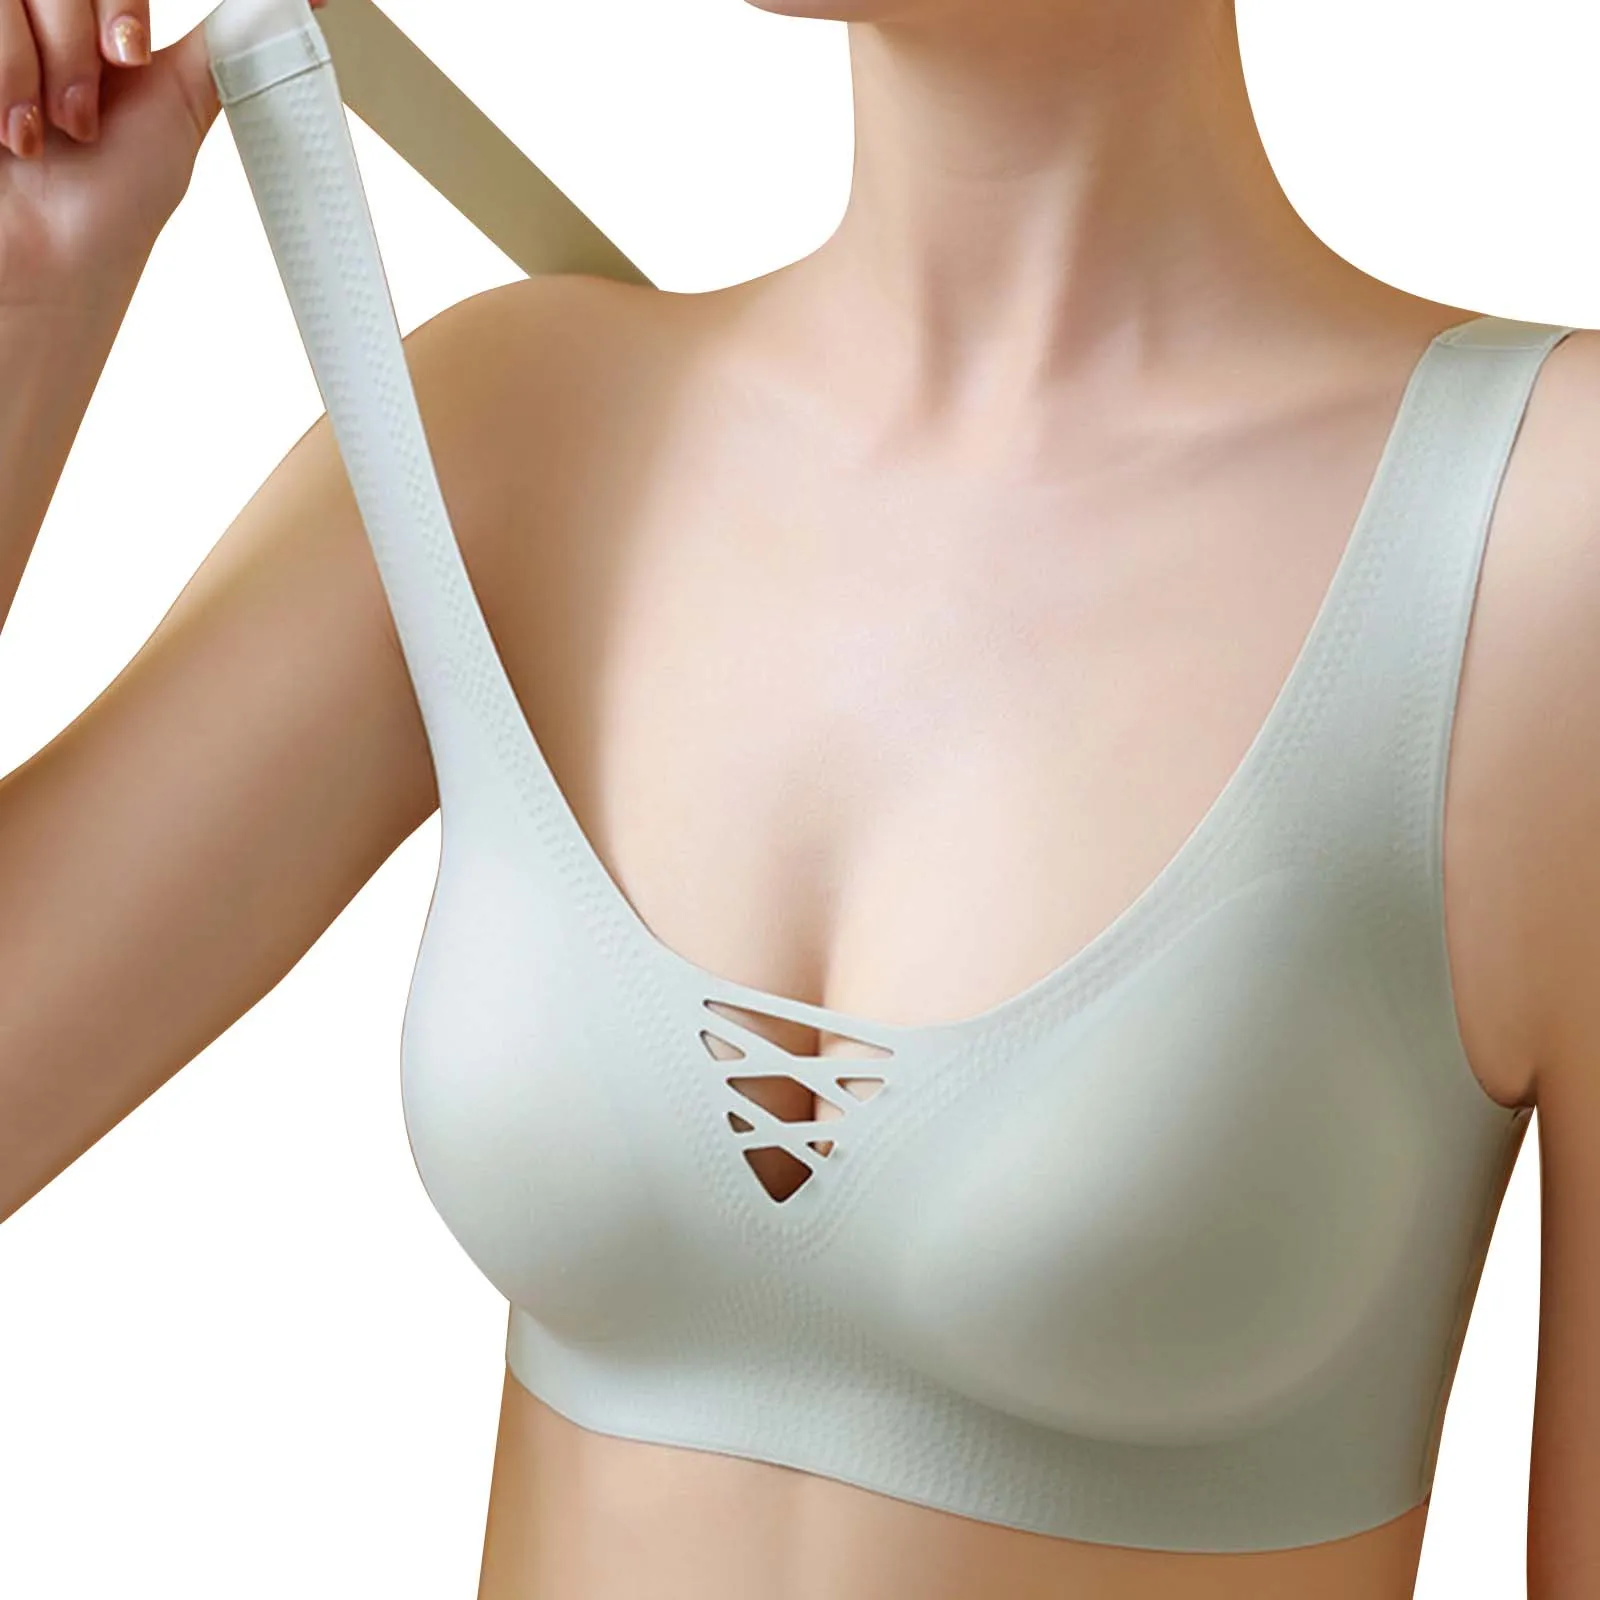 Women's Comfortable And Stylish Non Wired Push Up Bra With Side Support And  Breathable Design Ideal For Sports Activities And, Beyondshoping